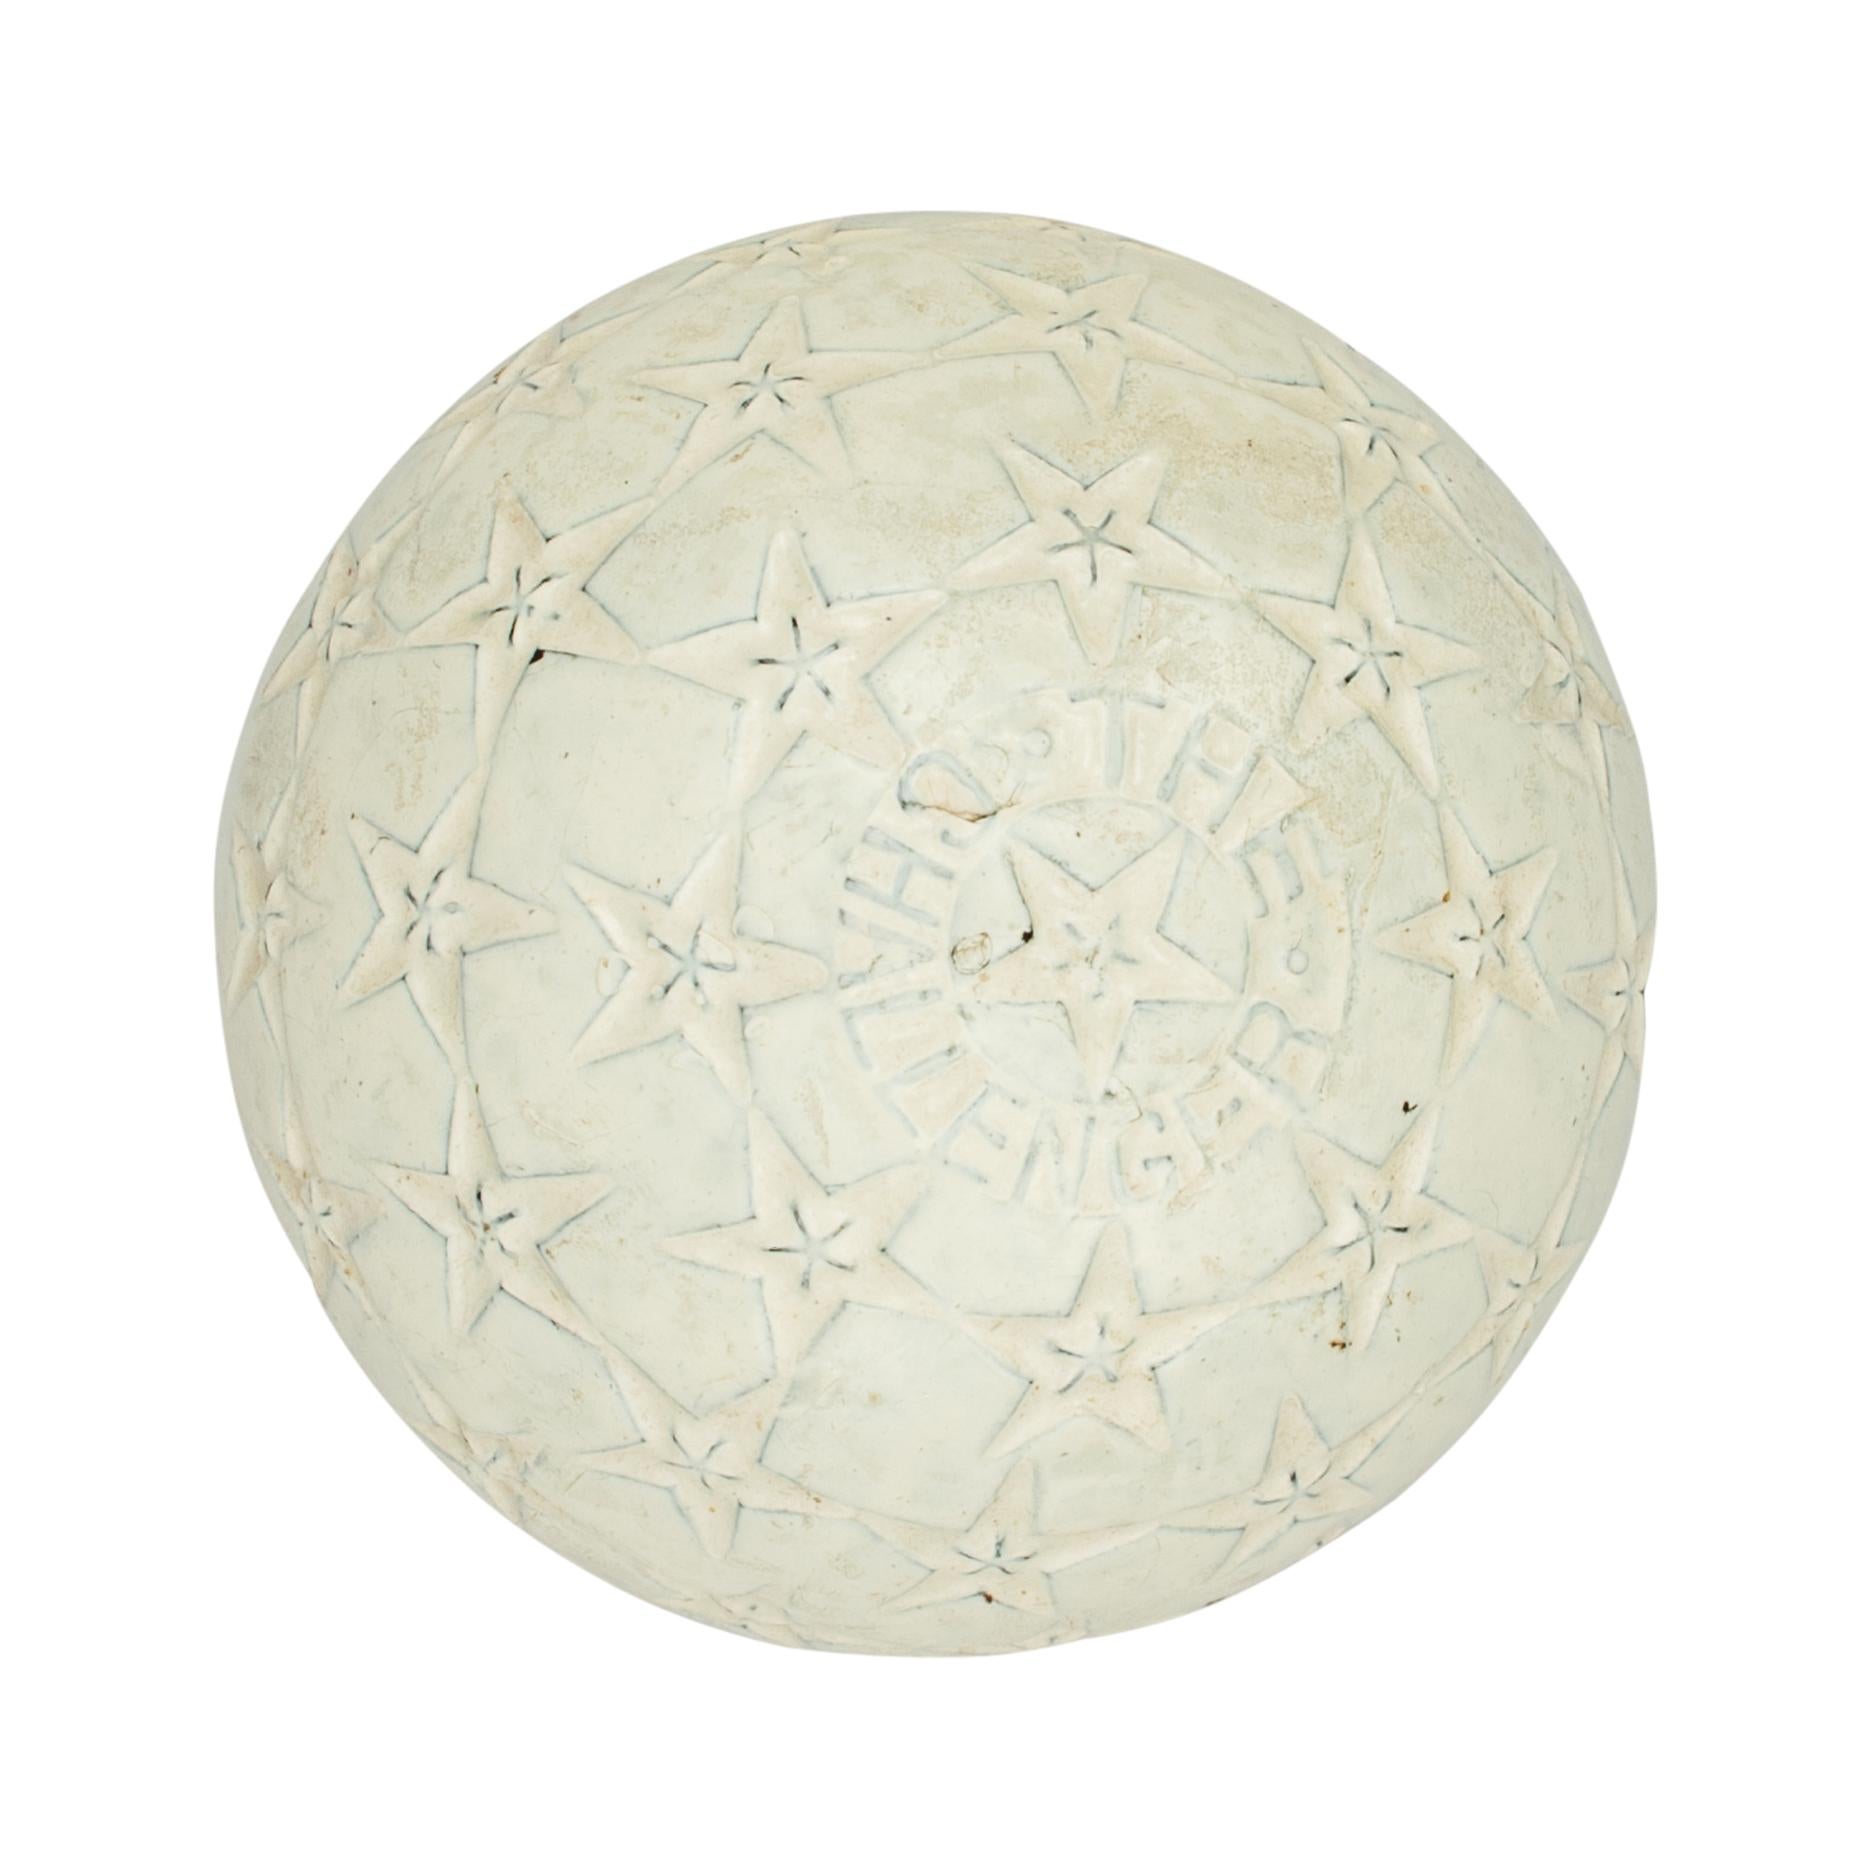 A rare Star Challenger rubber core golf ball, 'The 'Star' Challenger' featuring the unusual Stars within Stars pattern. Each 'Star' has five points and within the larger star there are smaller stars. The stars have been embossed into the cover and